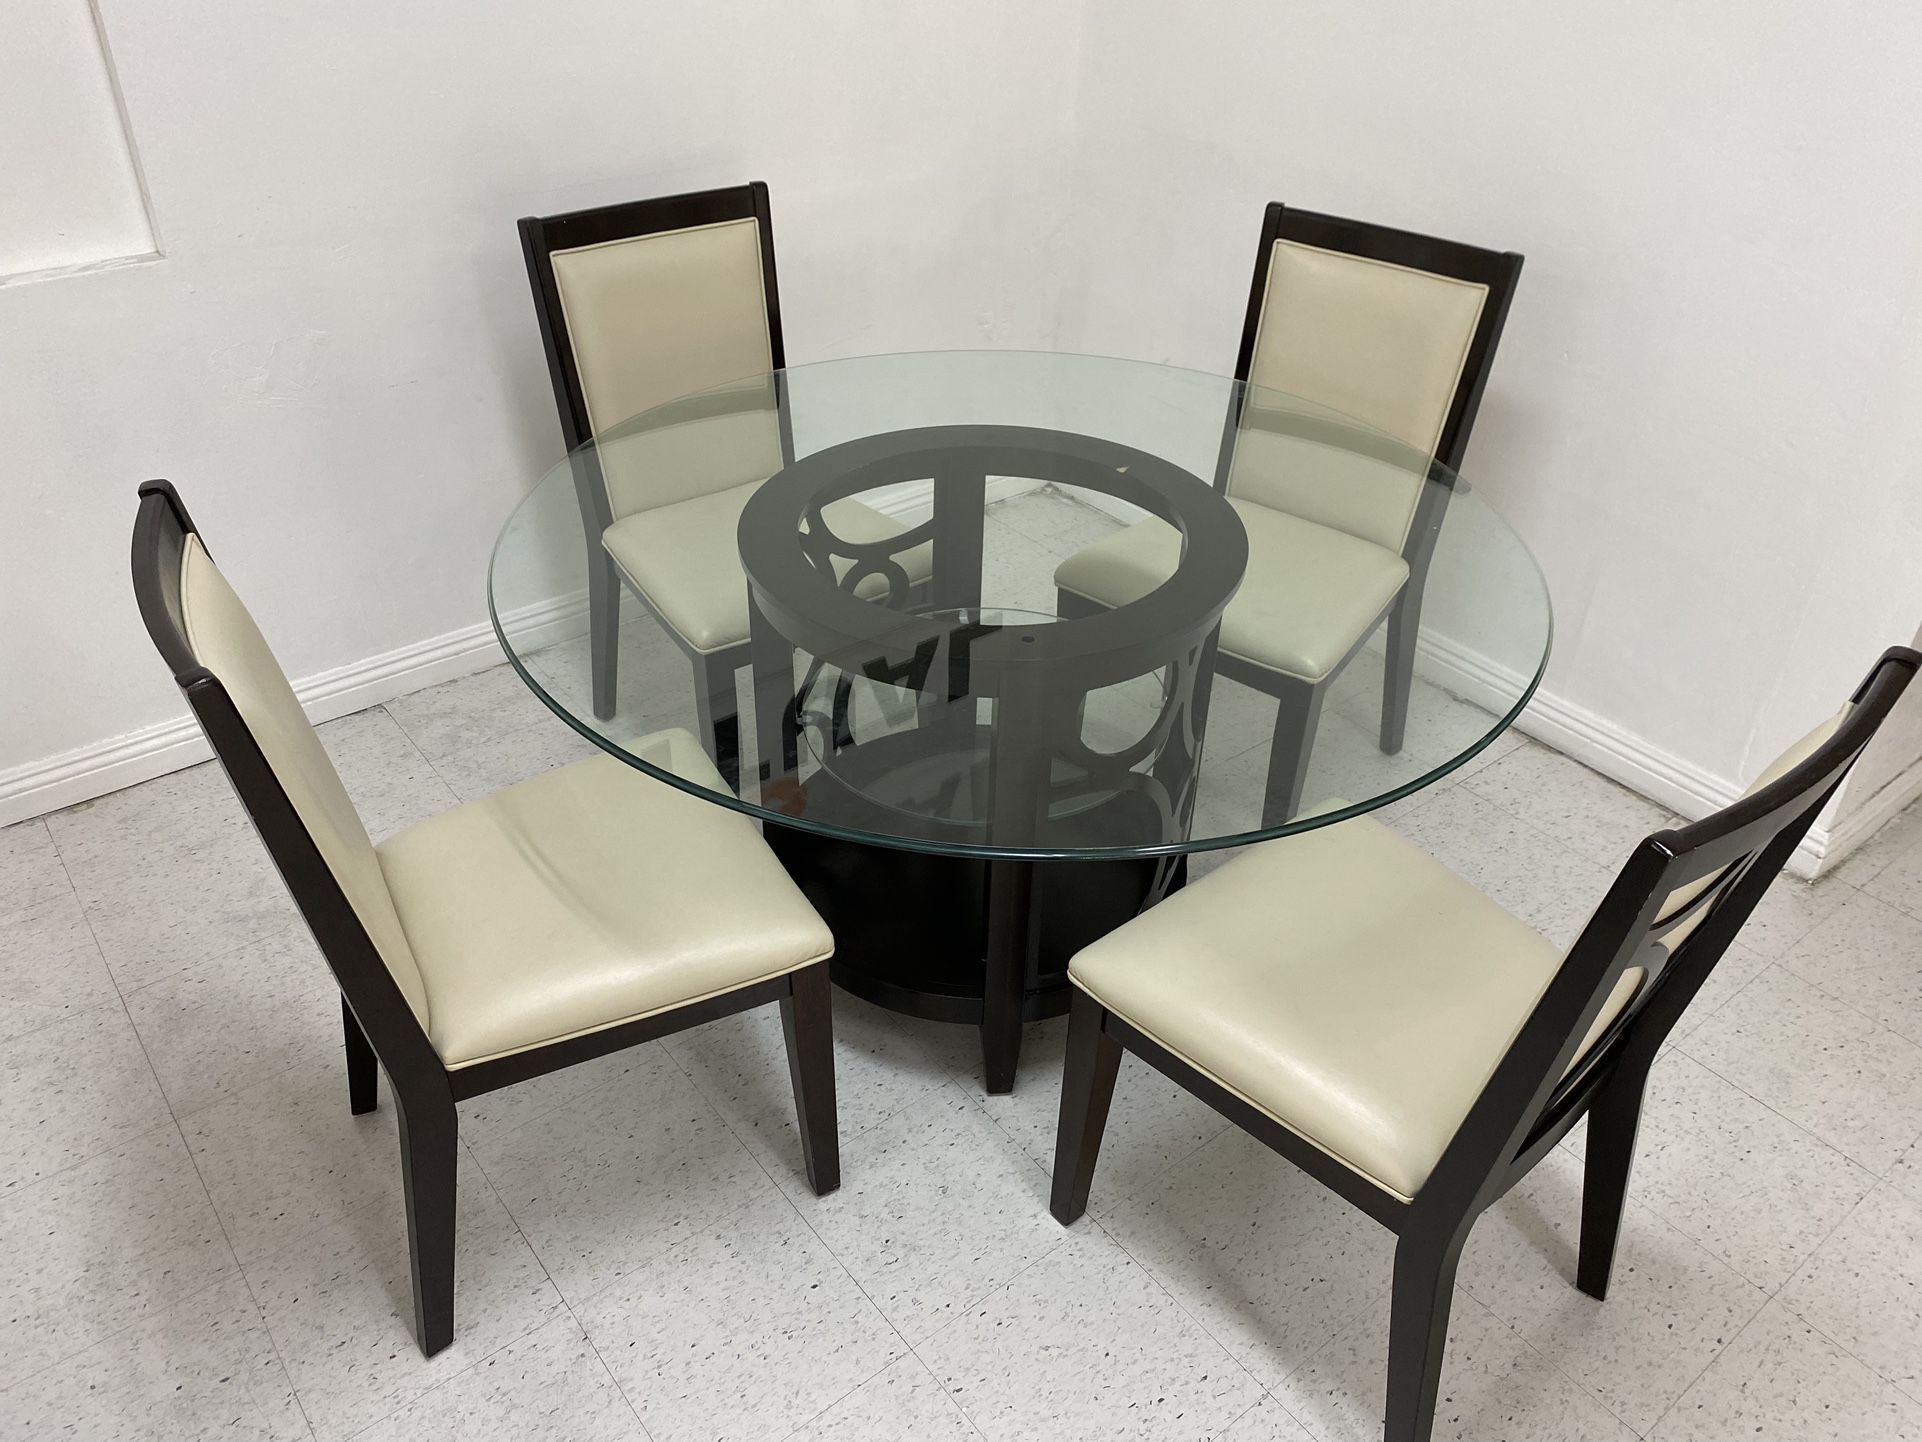 Glass Table For Sell